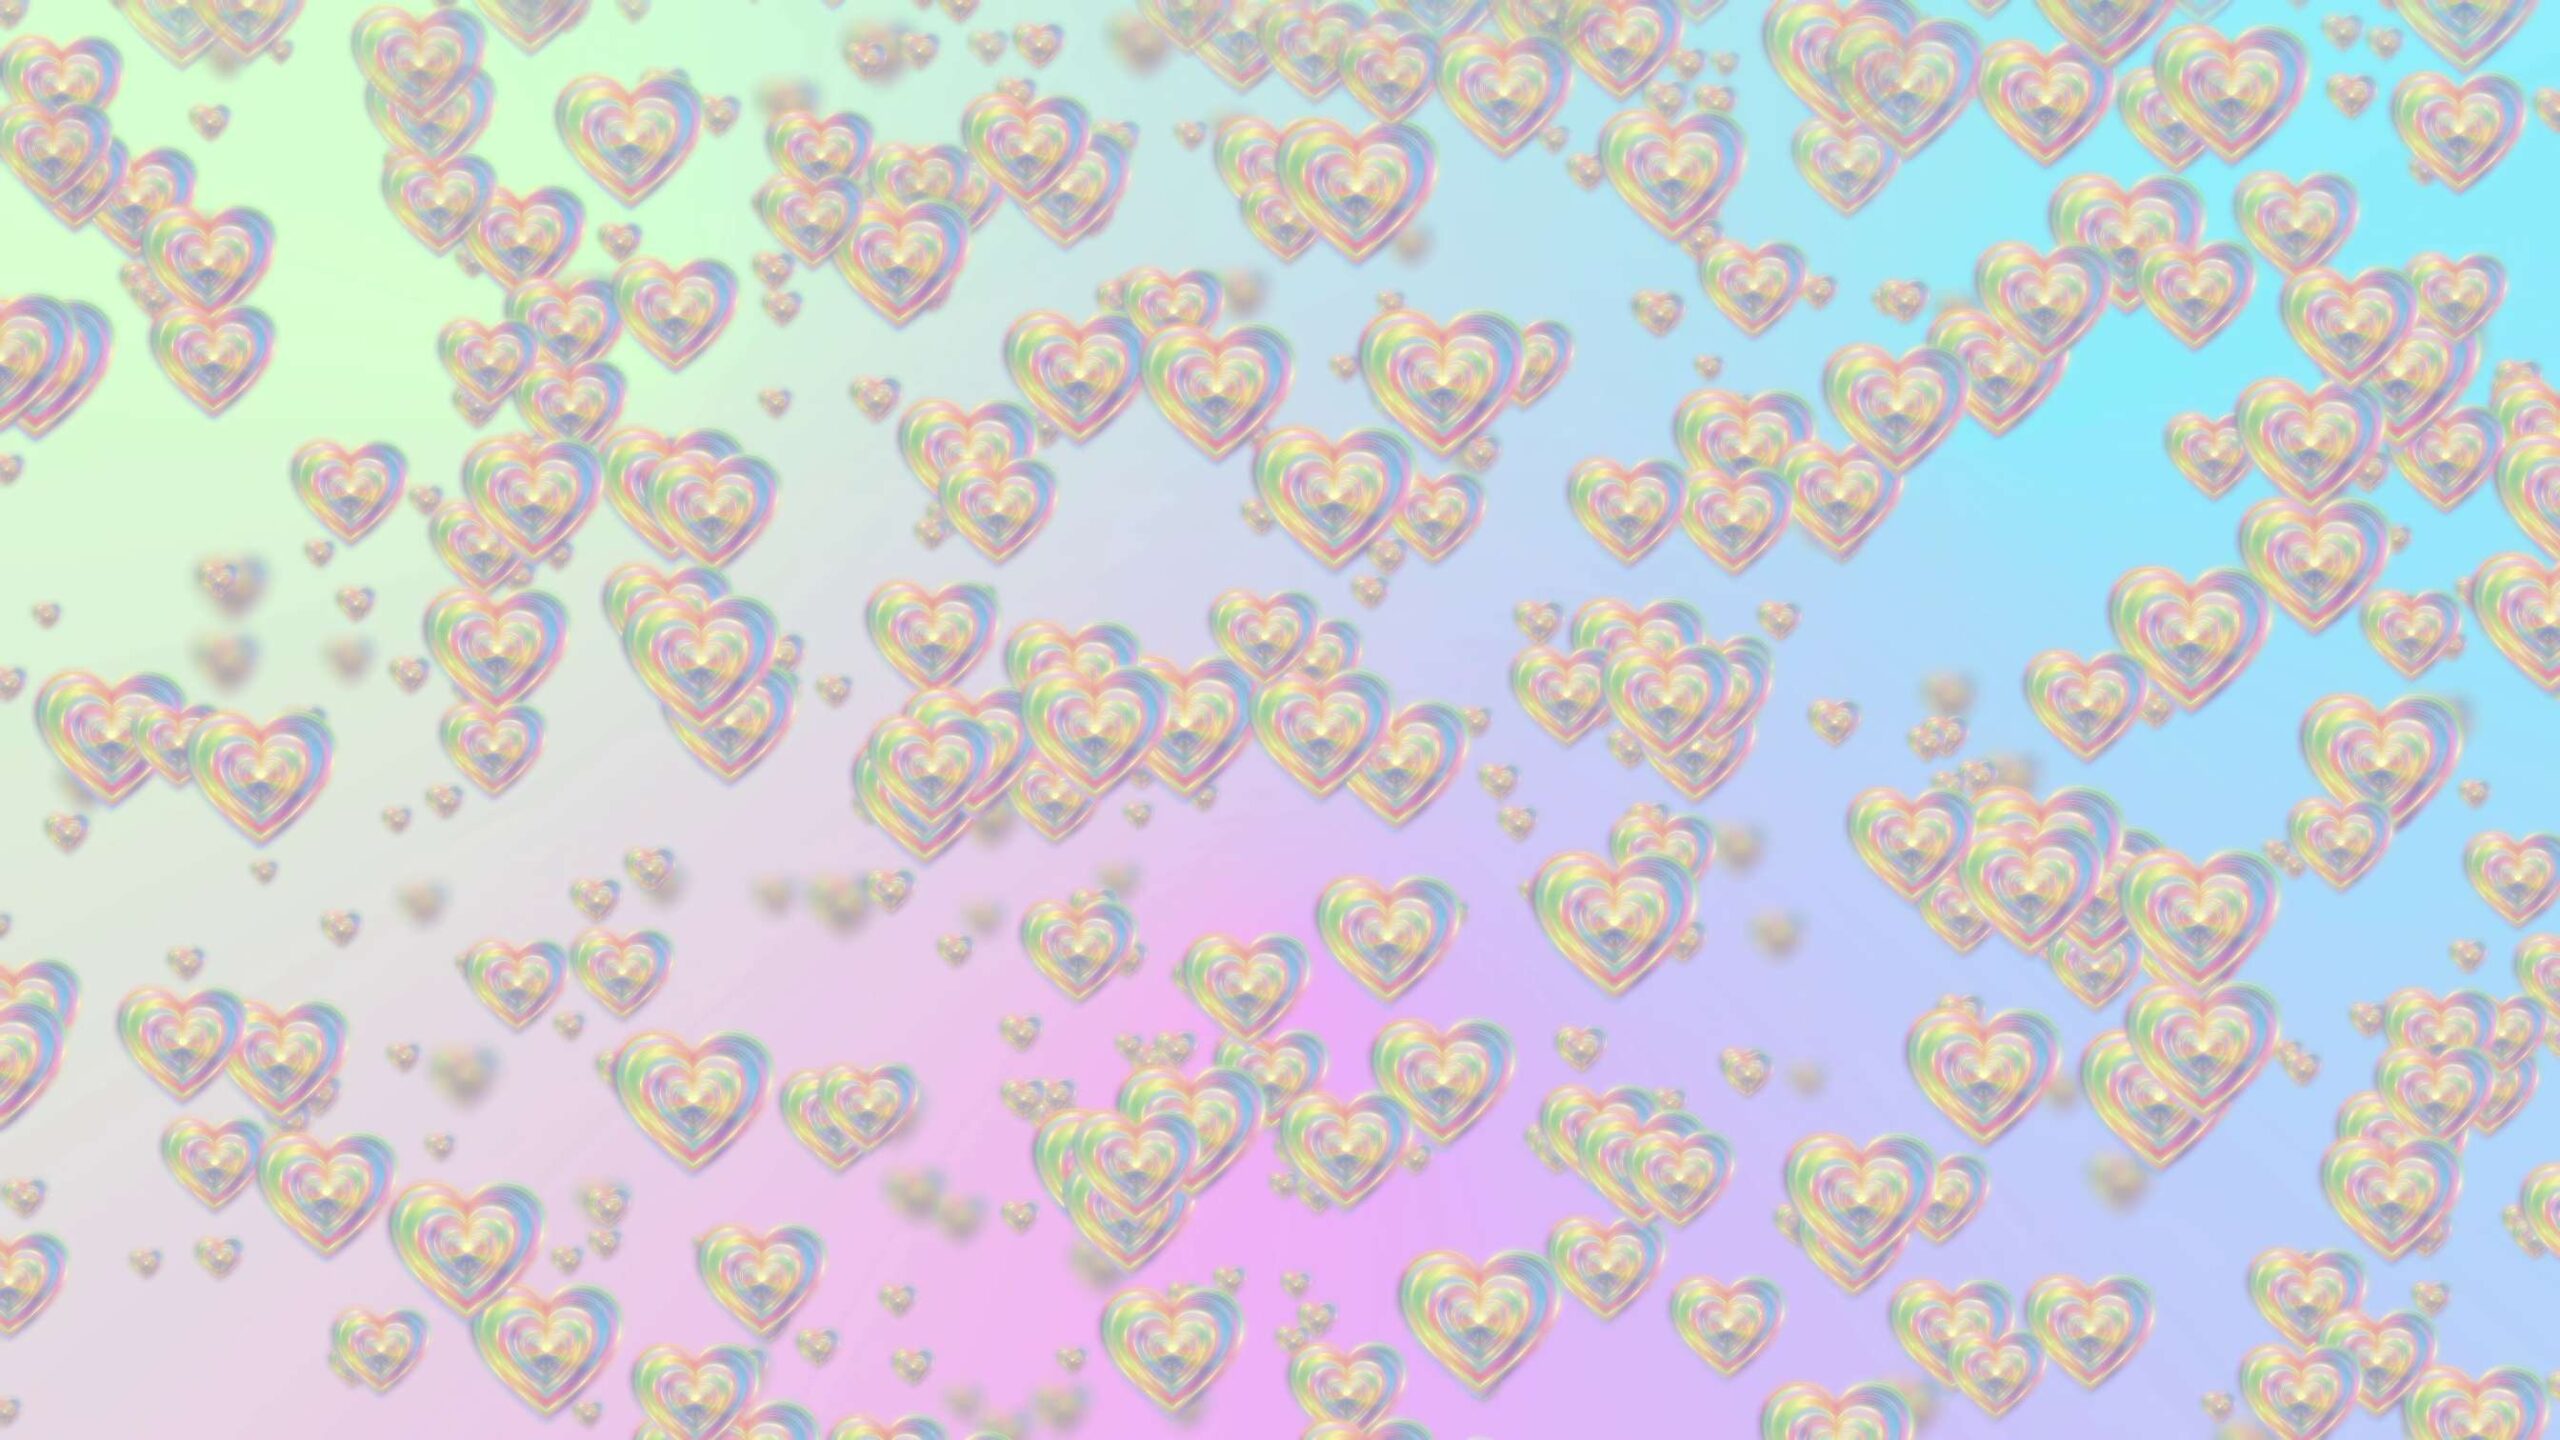 Colorful Hearts Valentine’s Day Screensaver || FREE DOWNLOAD || 4K Motion Background